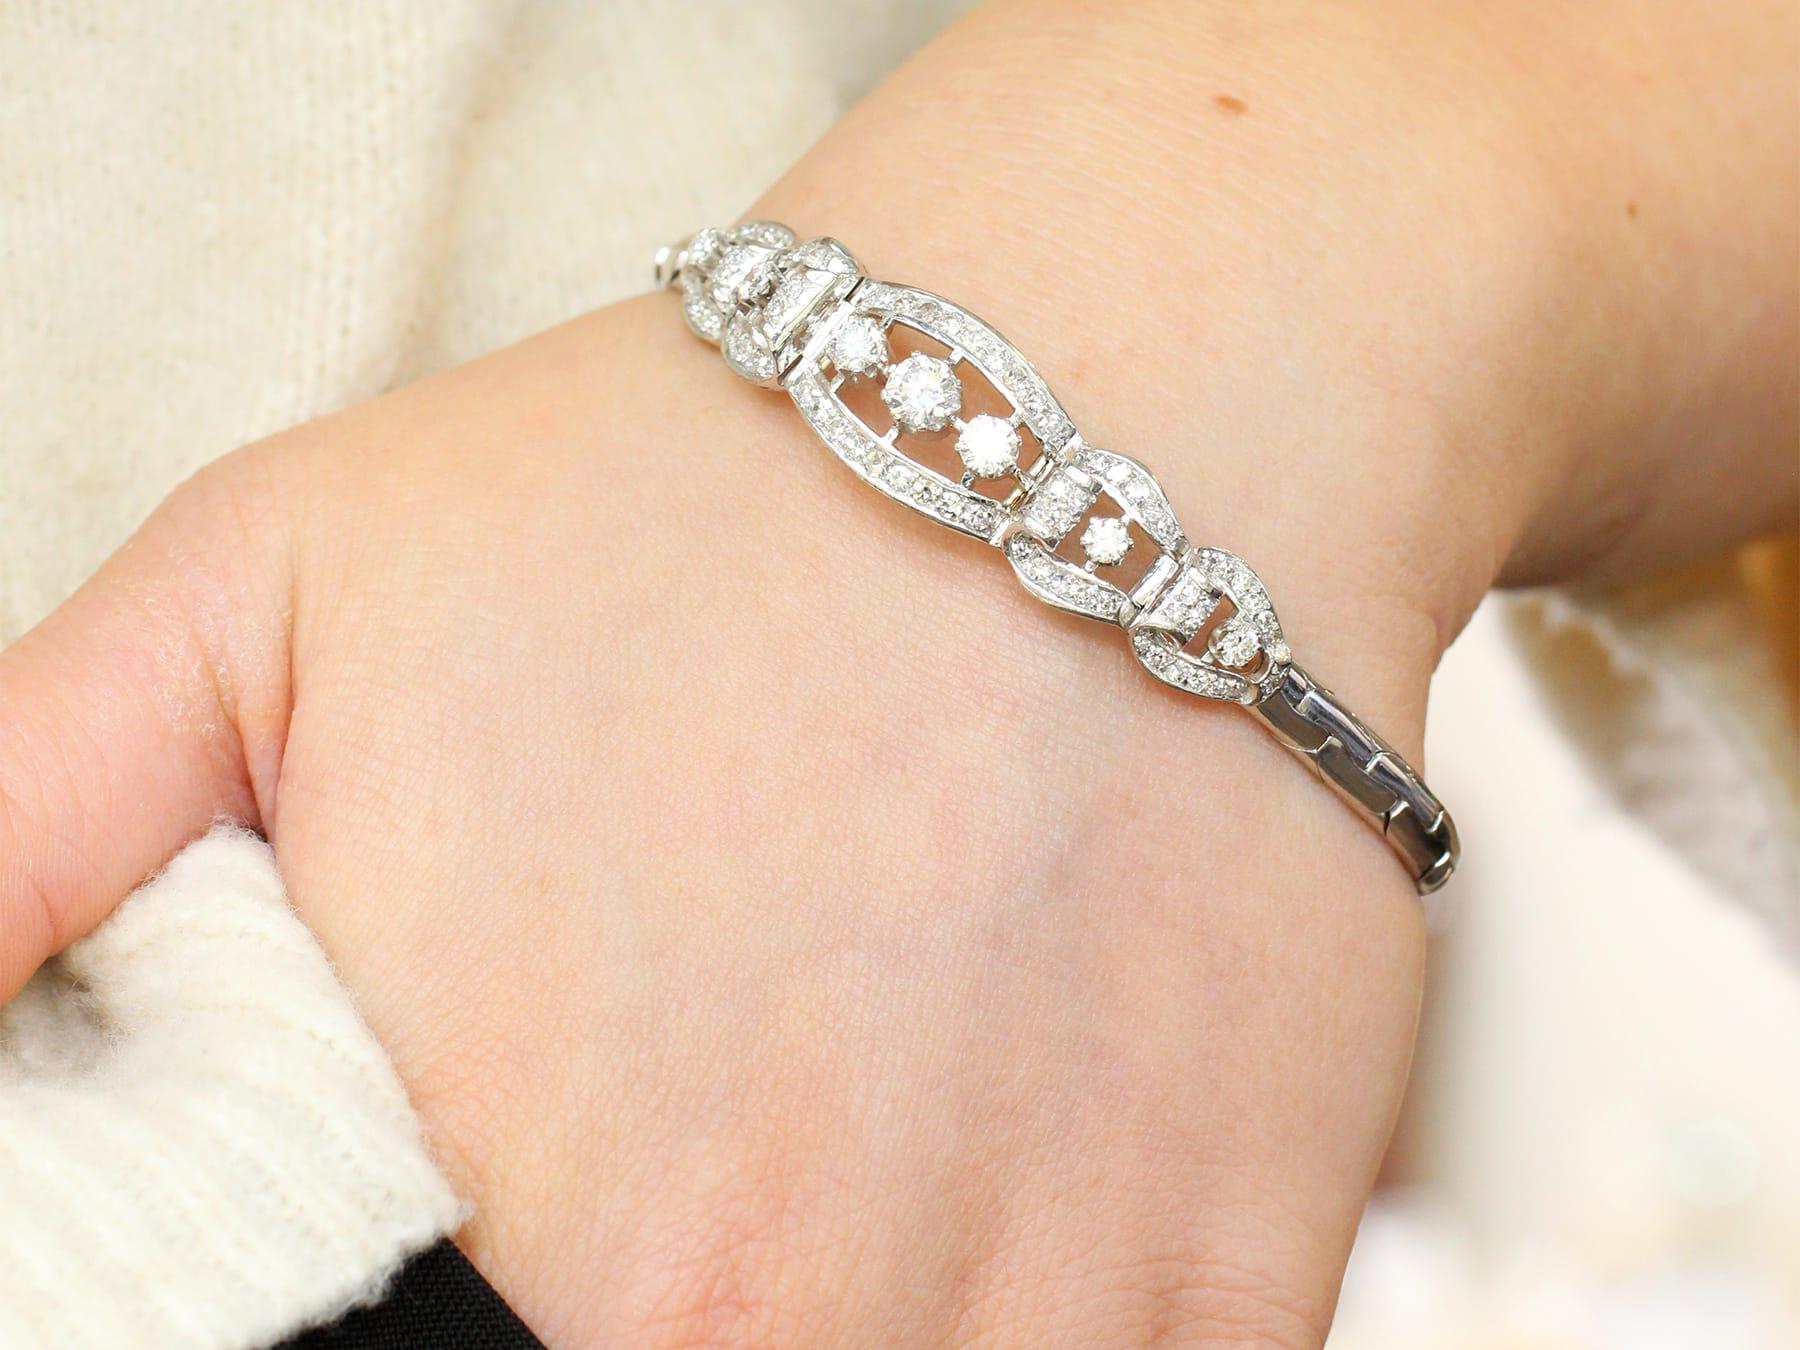 Antique 2.47Ct Diamond and 18k White Gold Bracelet Circa 1935 In Excellent Condition For Sale In Jesmond, Newcastle Upon Tyne